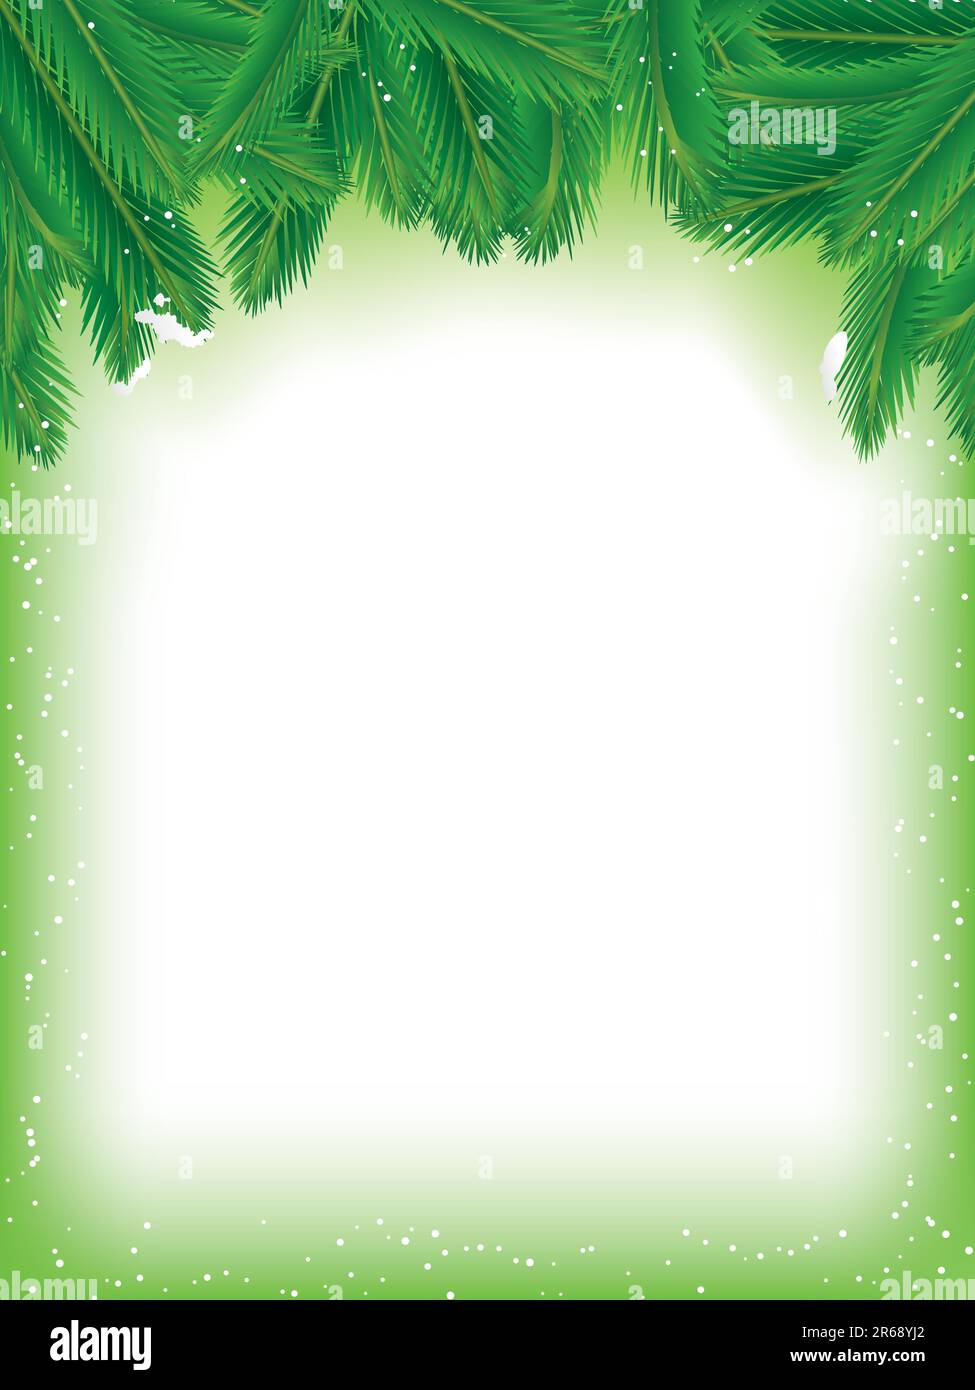 Vector illustratrion background for christmas and seasonal events Stock Vector